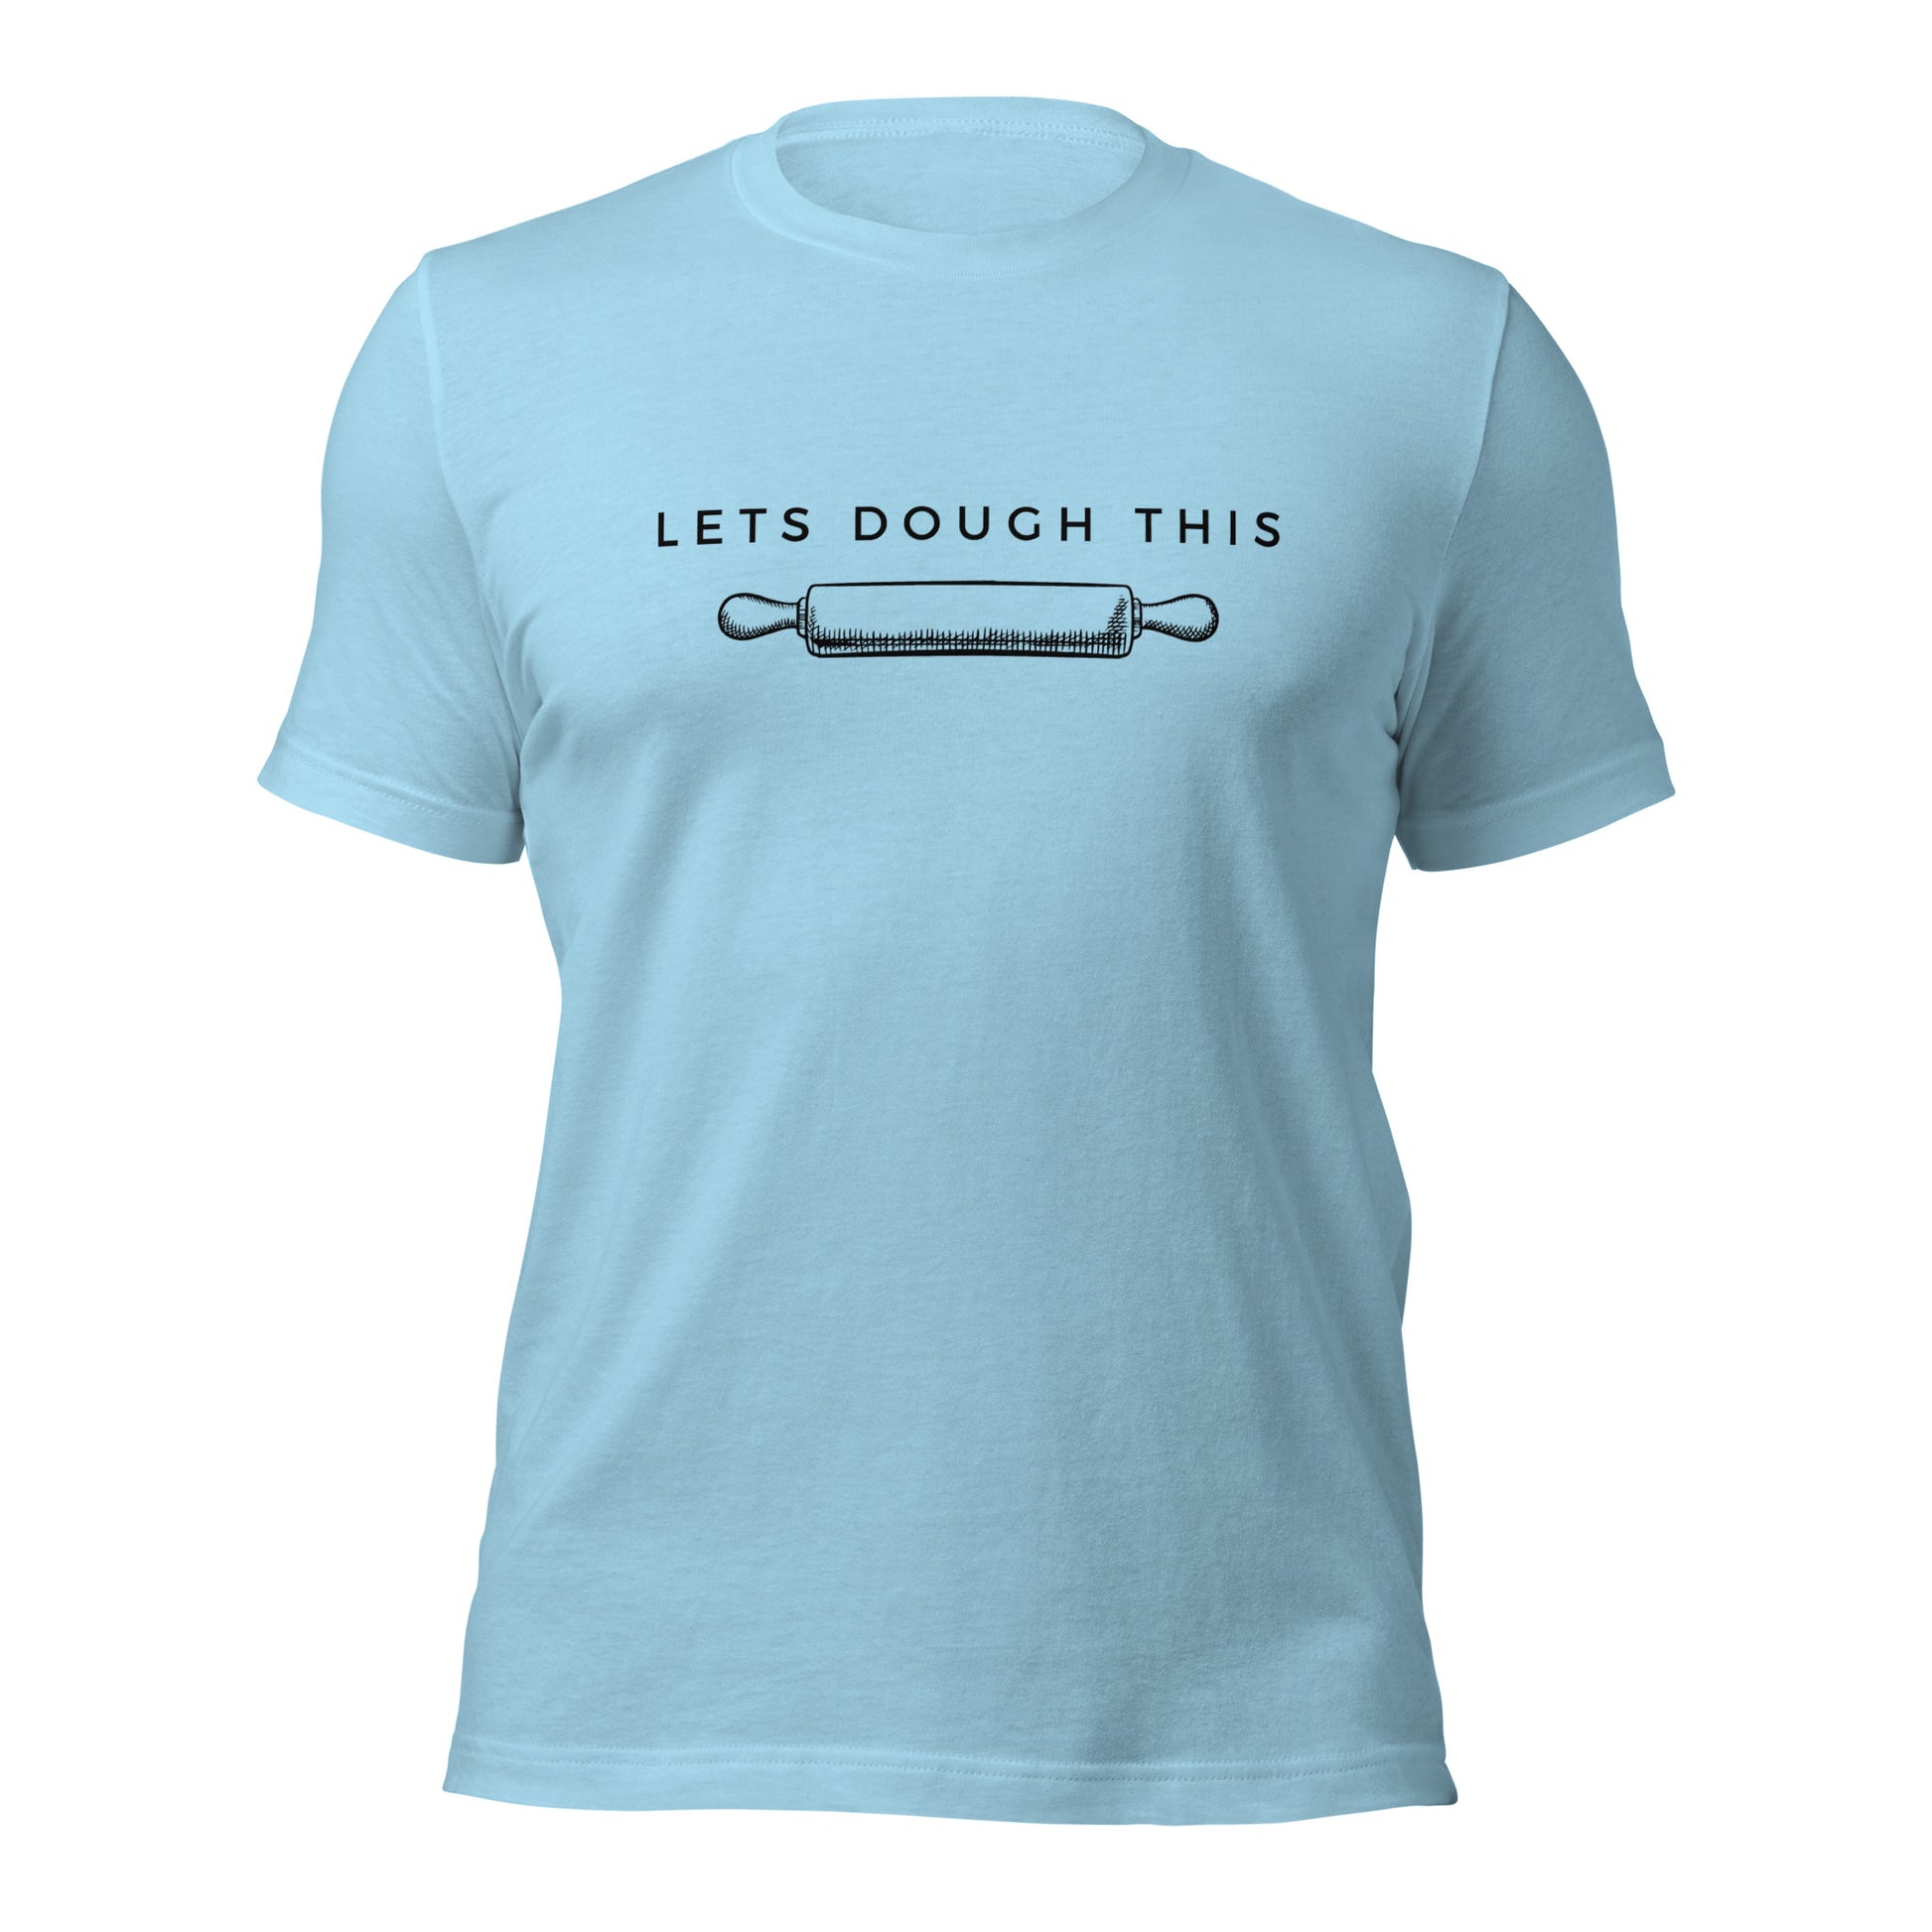 "Let’s Dough This" T-Shirt - Weave Got Gifts - Unique Gifts You Won’t Find Anywhere Else!